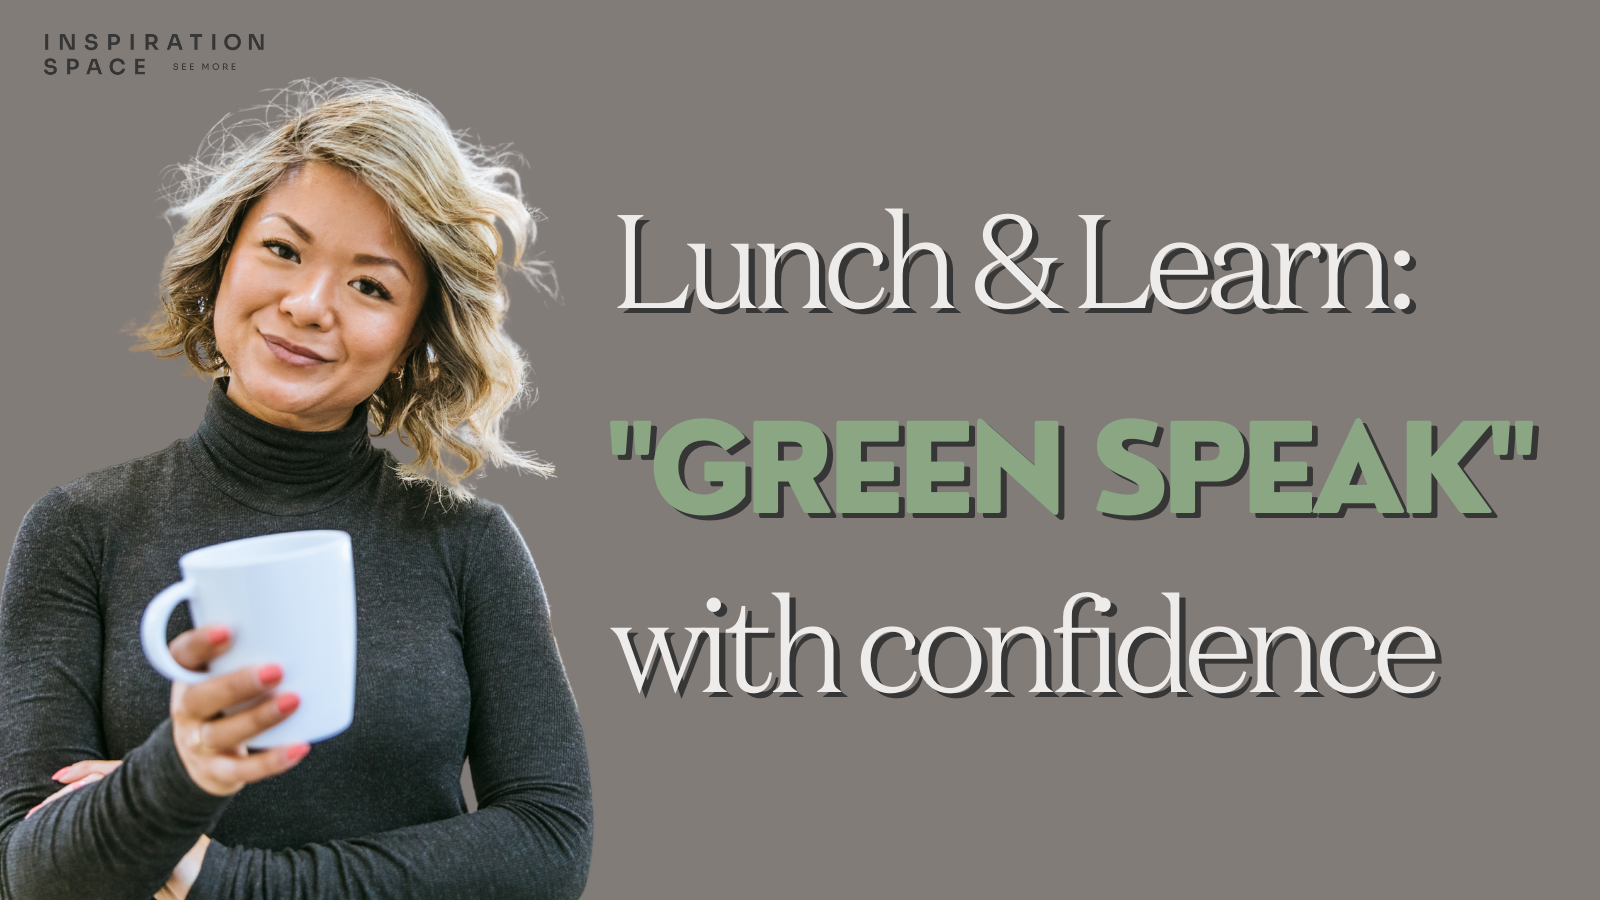 Lunch & Learn: "Green Speak" with Confidence